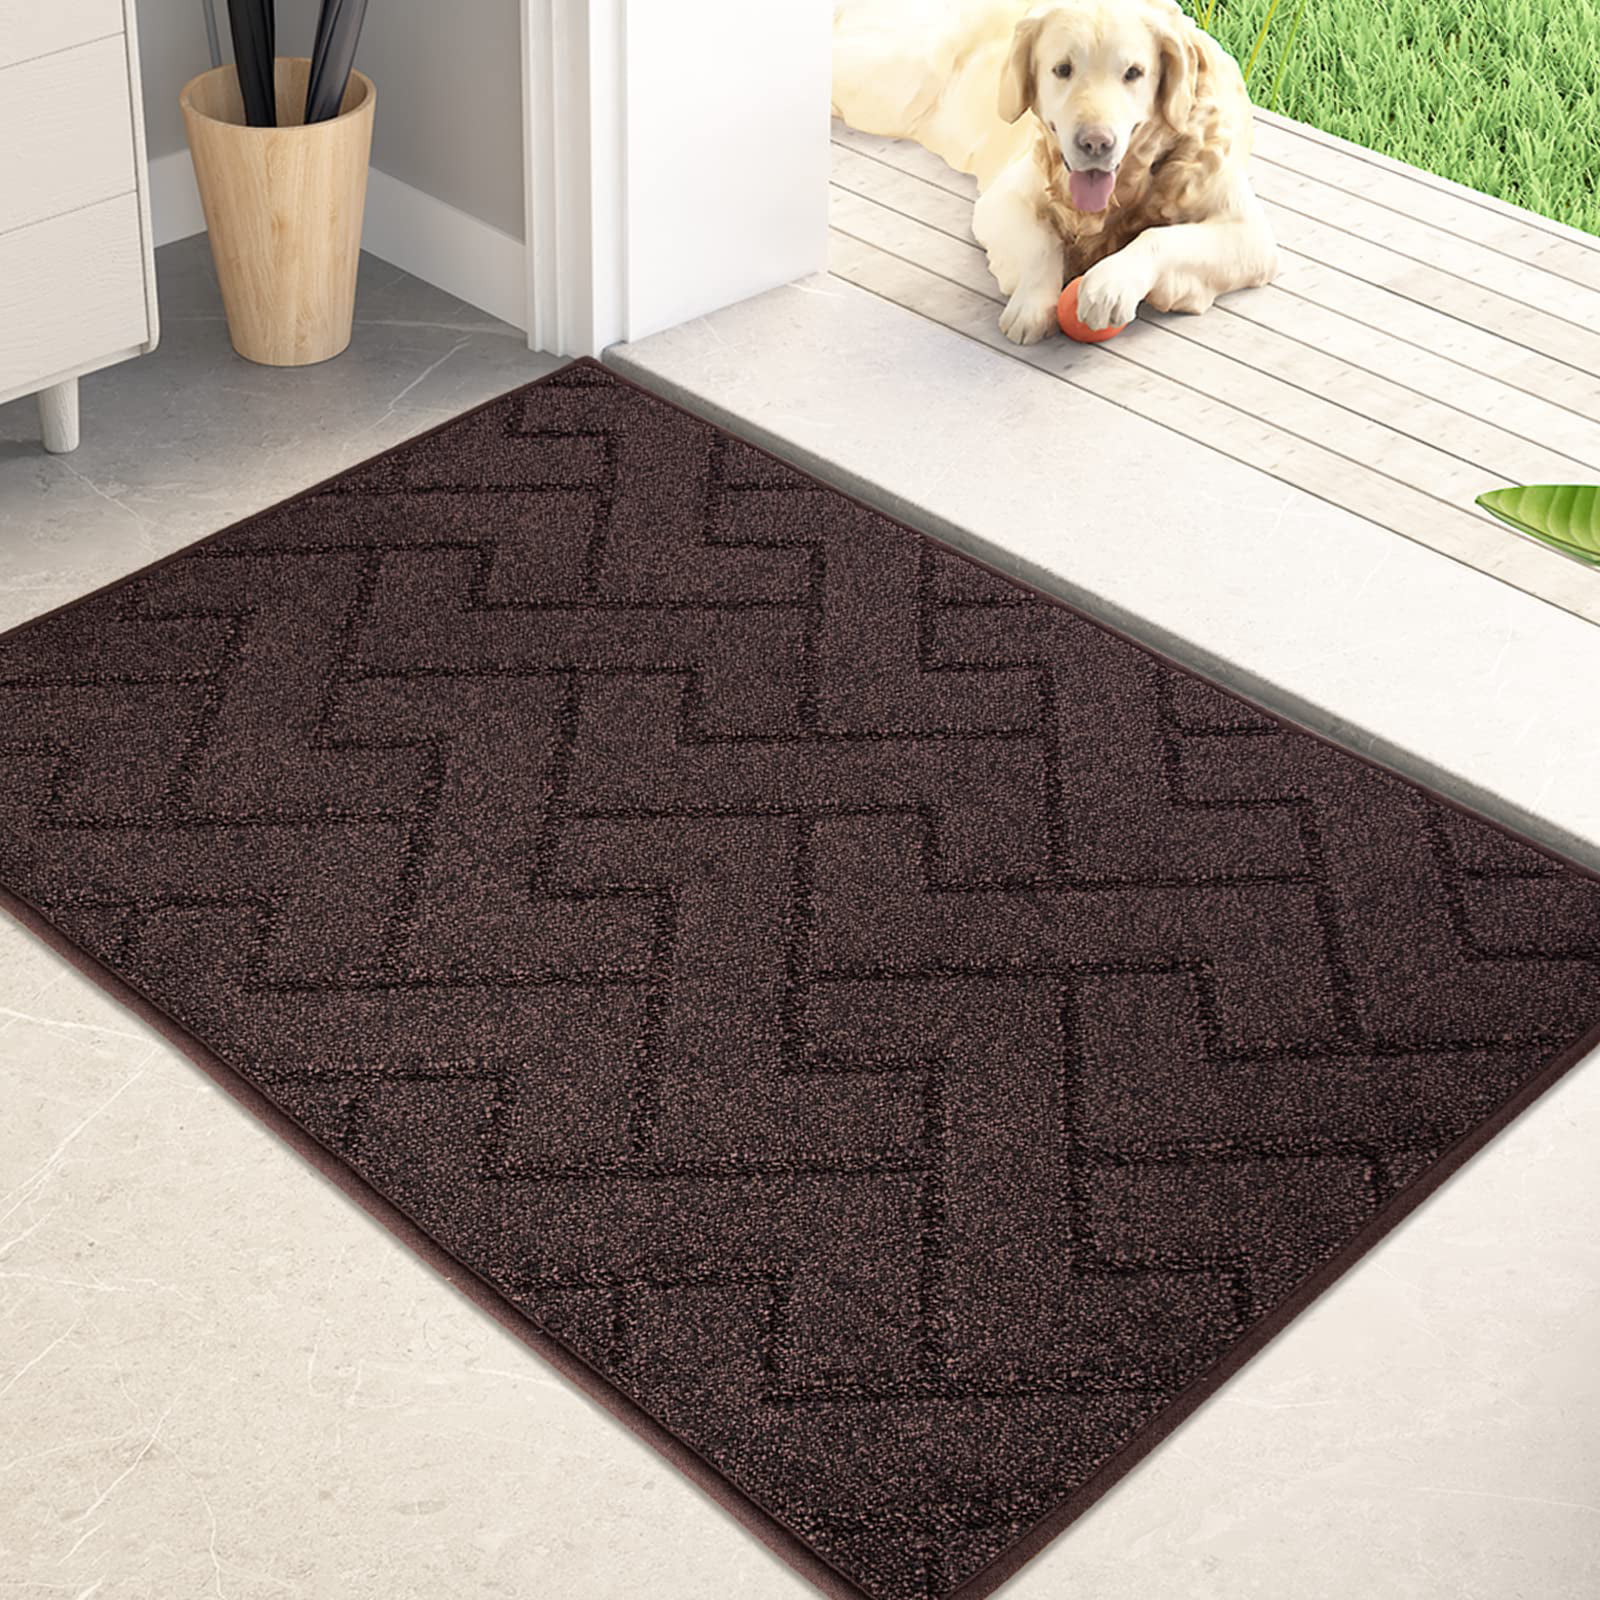 This doormat with 17,000 reviews traps dirt and snow so my floors